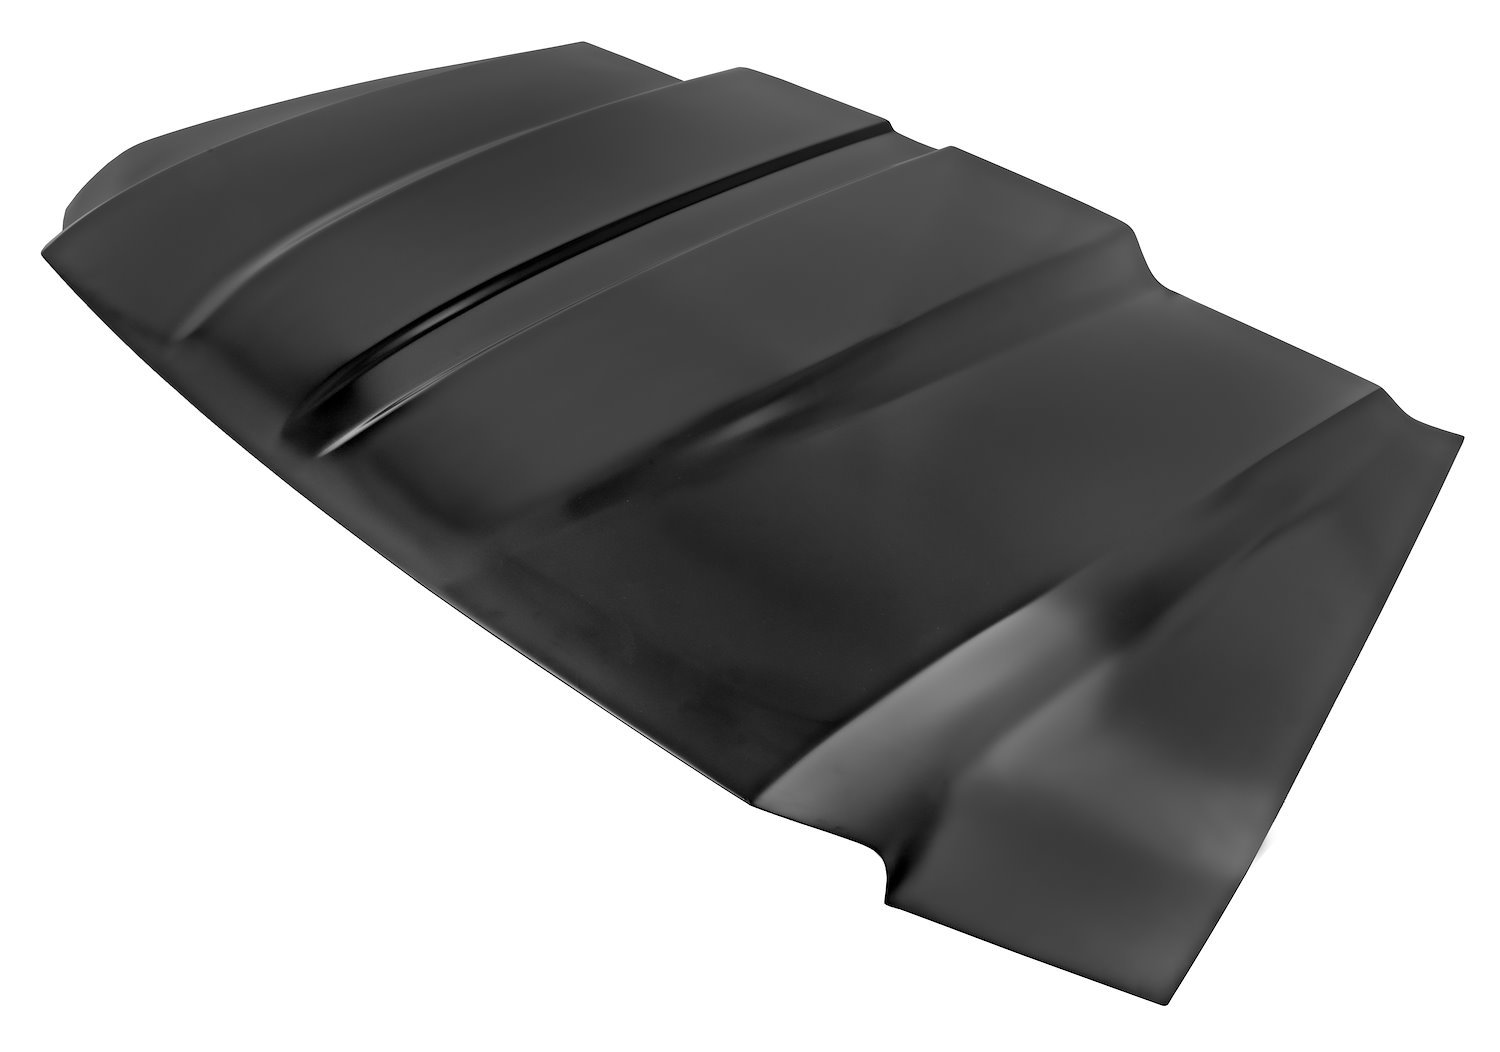 Cowl Induction Hood for 1999-2002 Ford F250, F350 Super Duty [Dual Cowl]